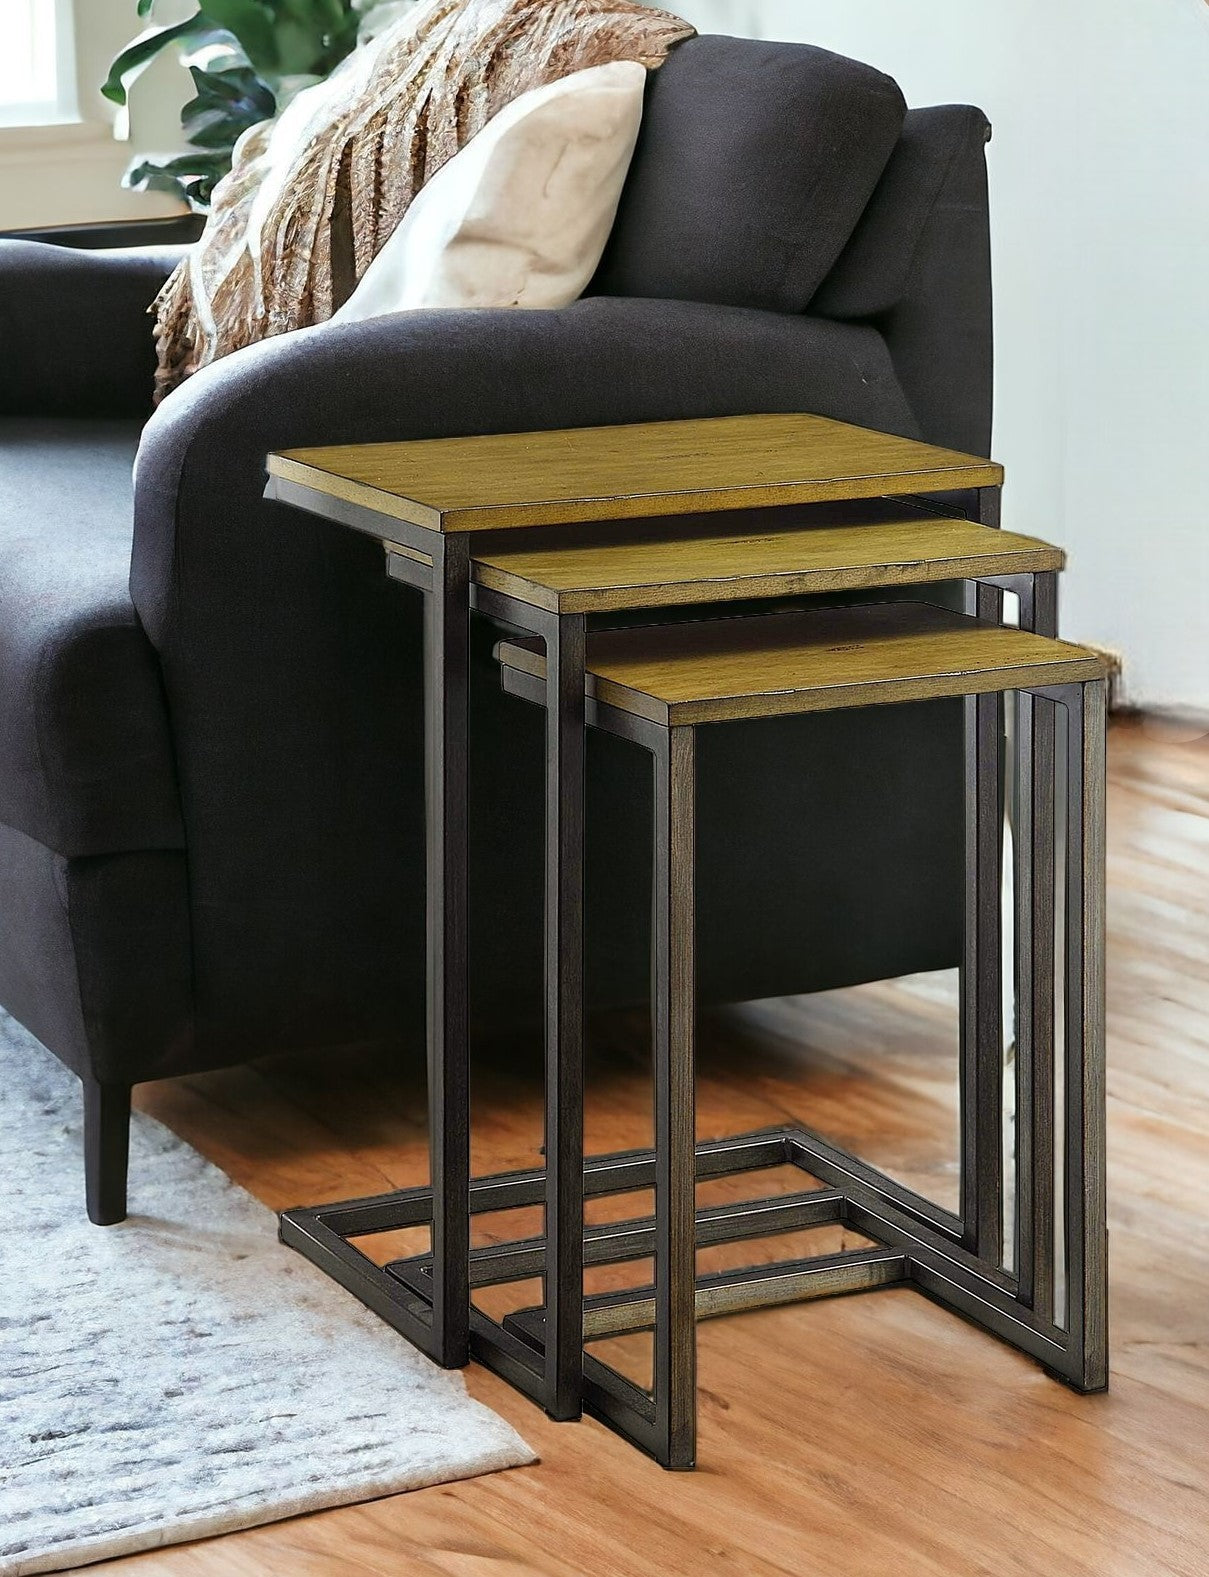 24" Black And Brown Solid Wood Rectangular End Table